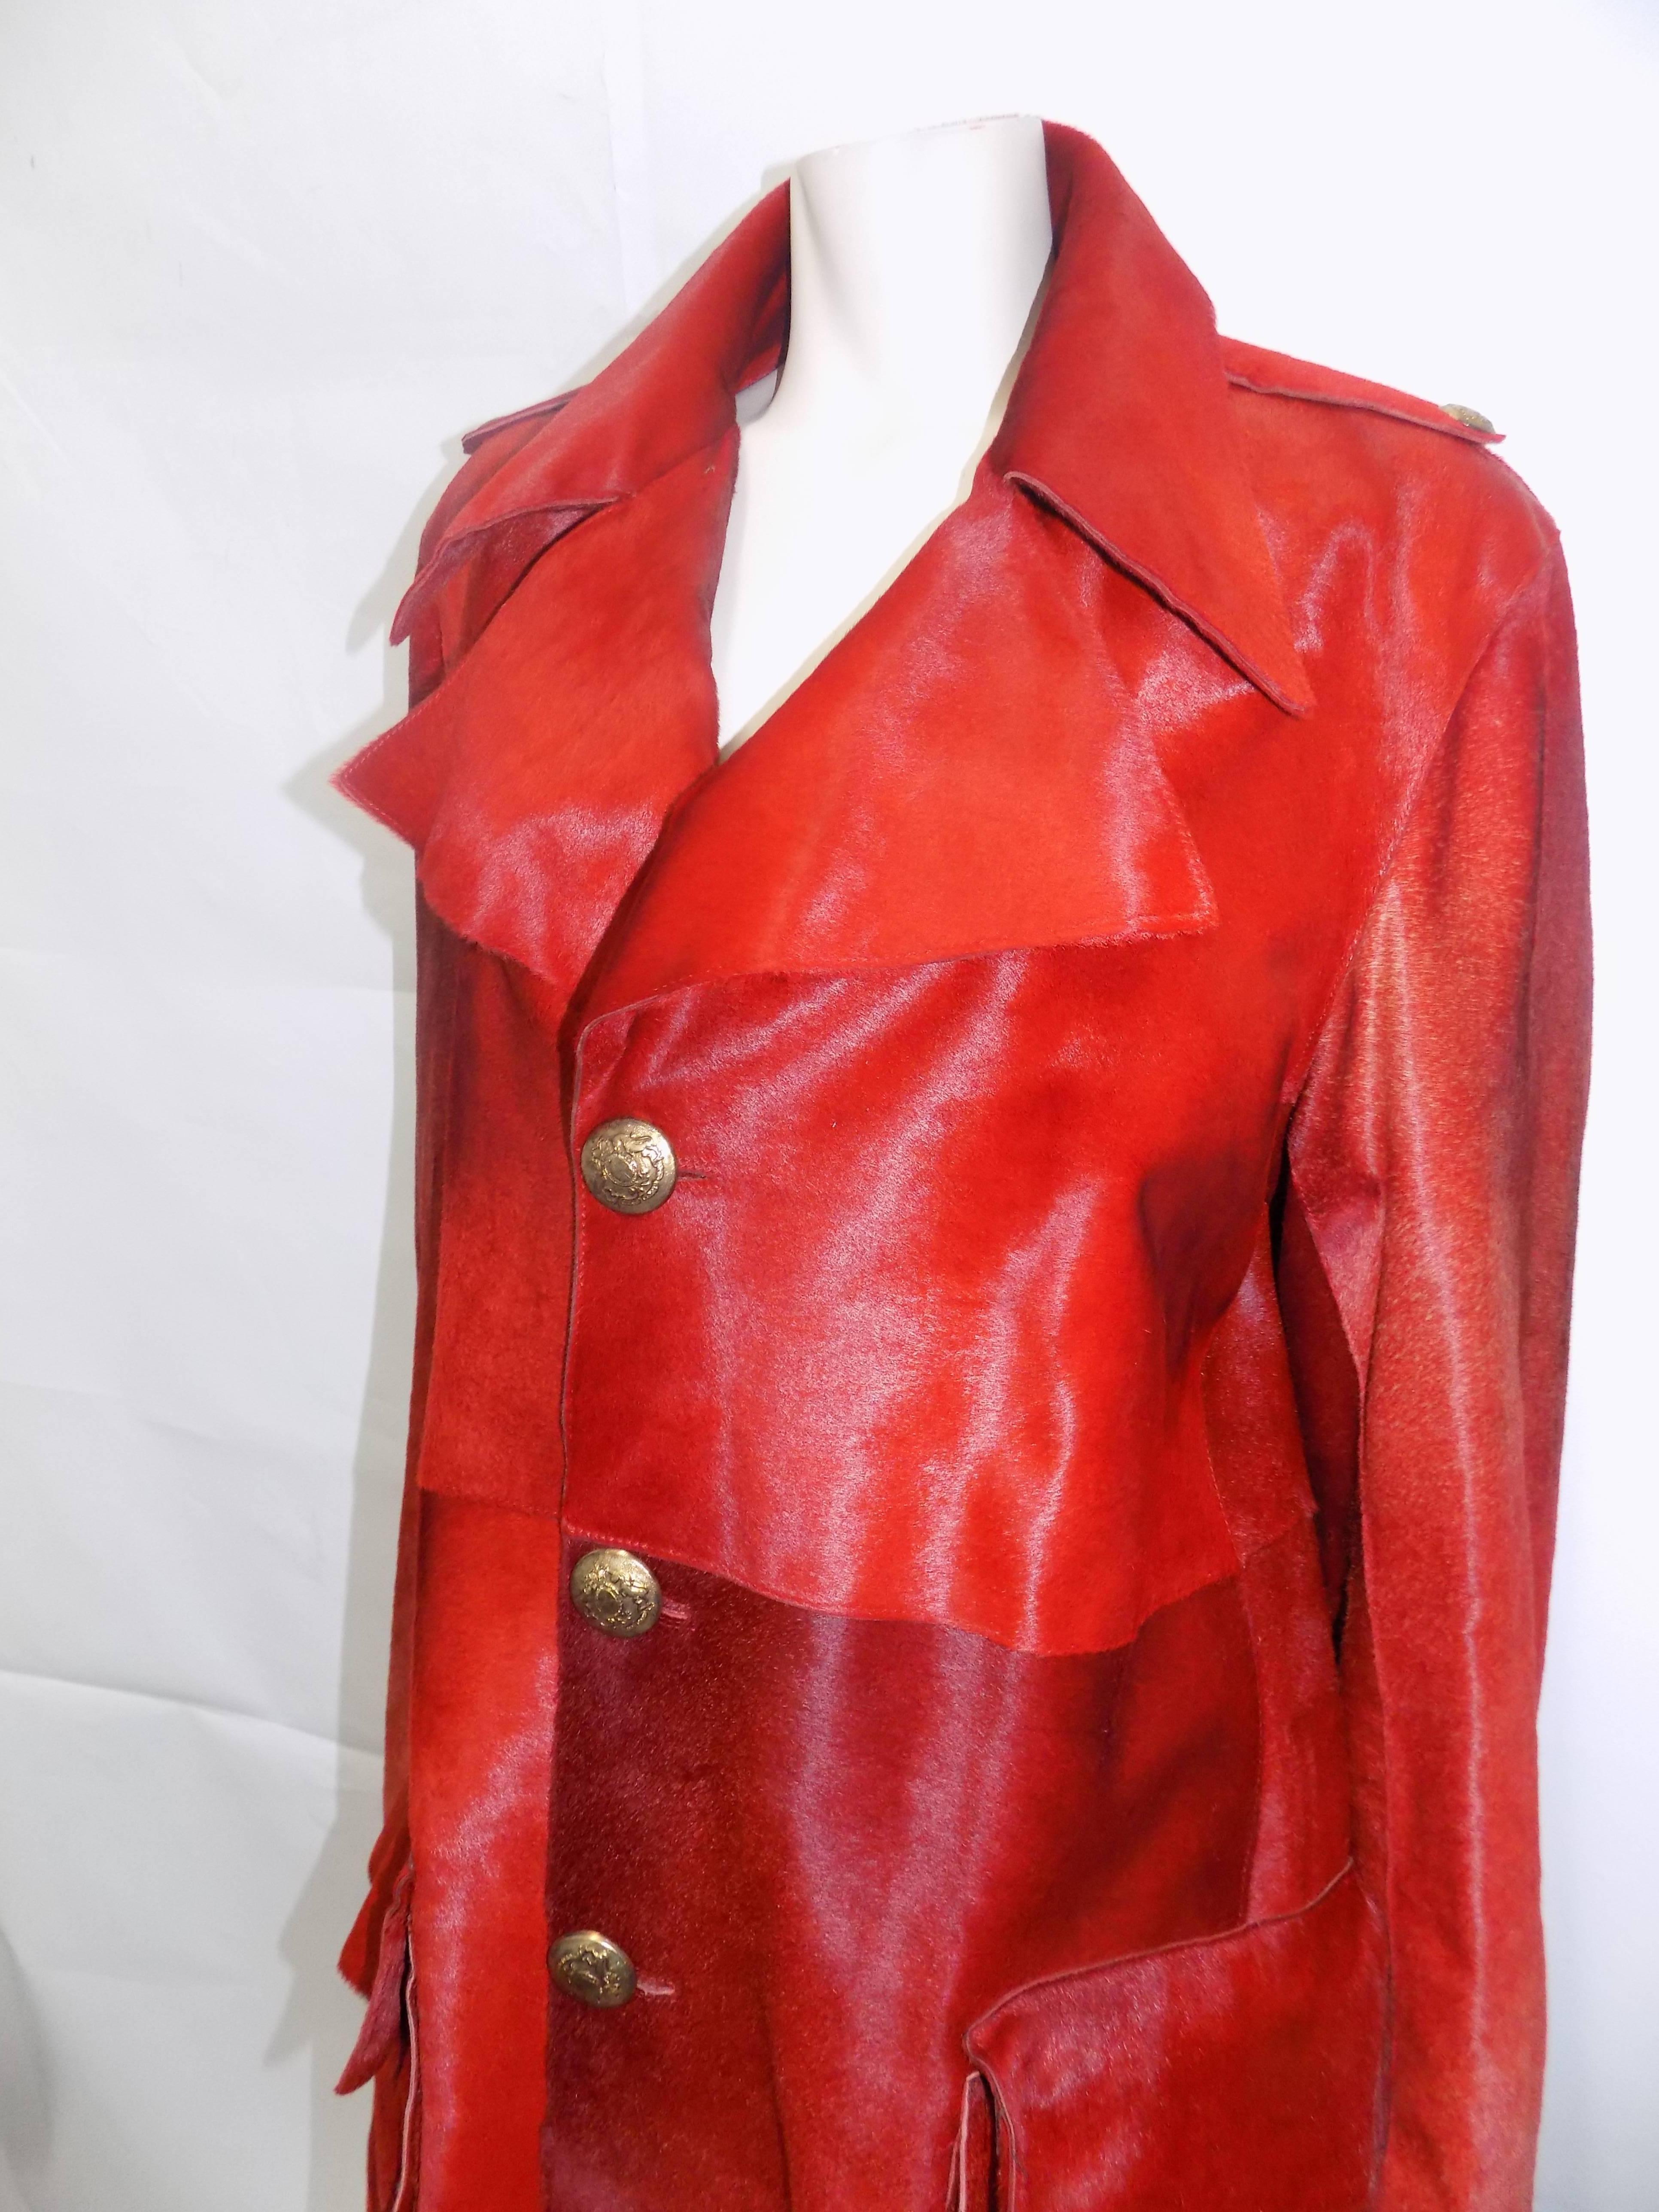 Breathtaking One of a Kind Roberto Cavalli   Blood Red Pony Hair Coat . Unisex style. Fabulous for men and for woman. Made for fashion show many years ago but ever since then kept in the stylist collection. Oversized two patch front pockets, and